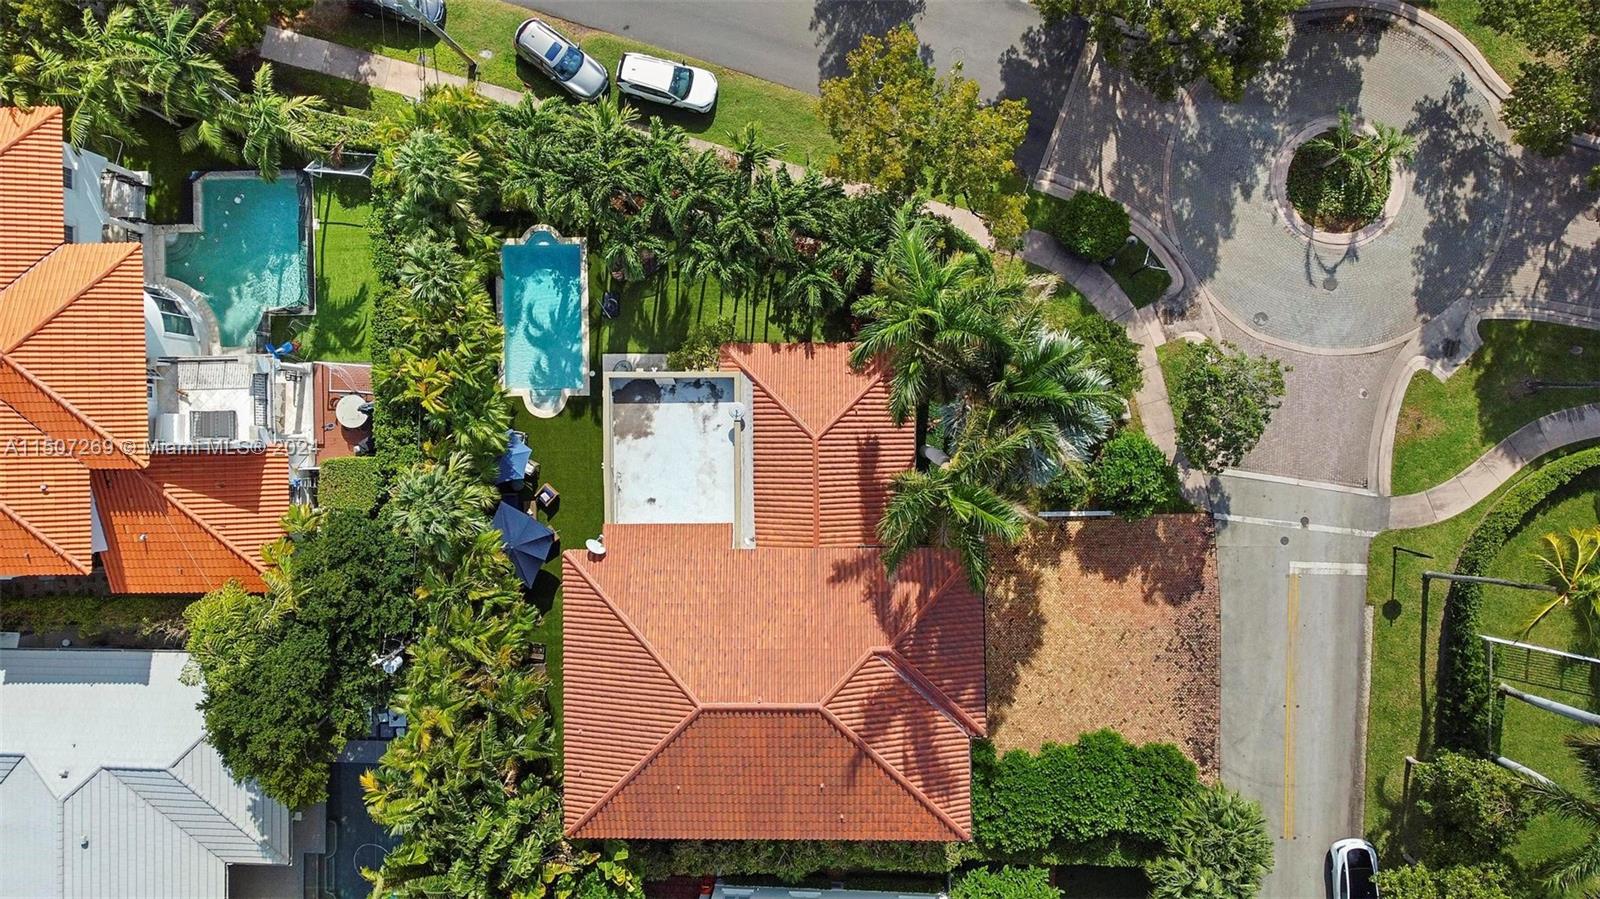 799 Allendale Rd Rd, Key Biscayne, Miami-Dade County, Florida - 5 Bedrooms  
5 Bathrooms - 